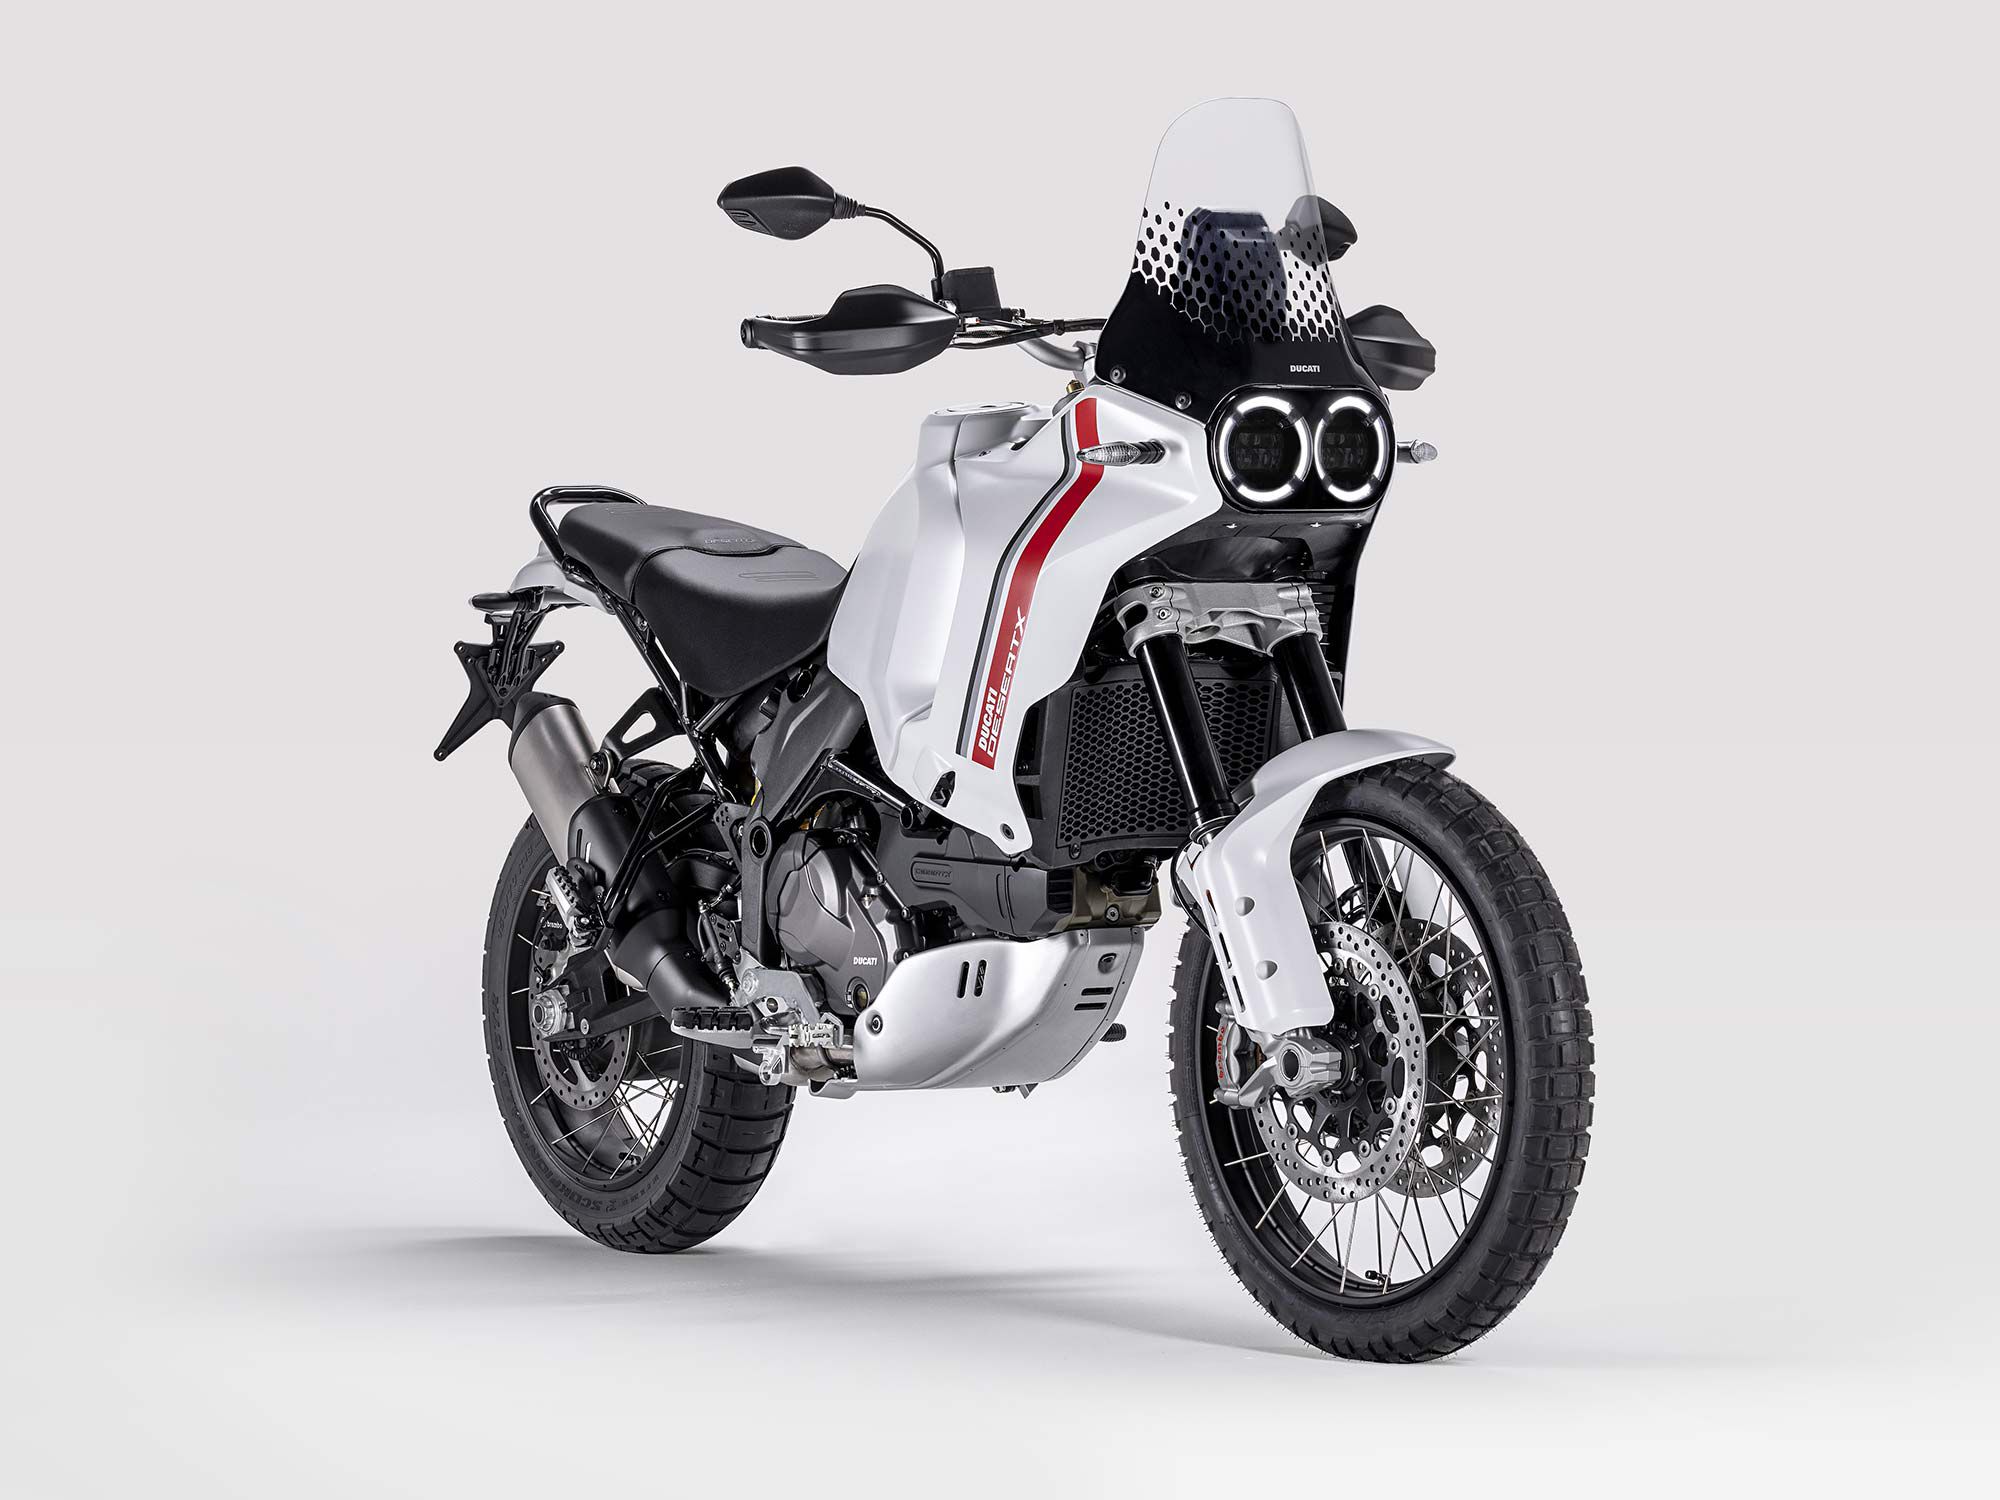 Ducati expands its US model lineup with a true dual sport in the form of the 21/18-inch wheel-equipped 2022 Ducati DesertX ($16,795).